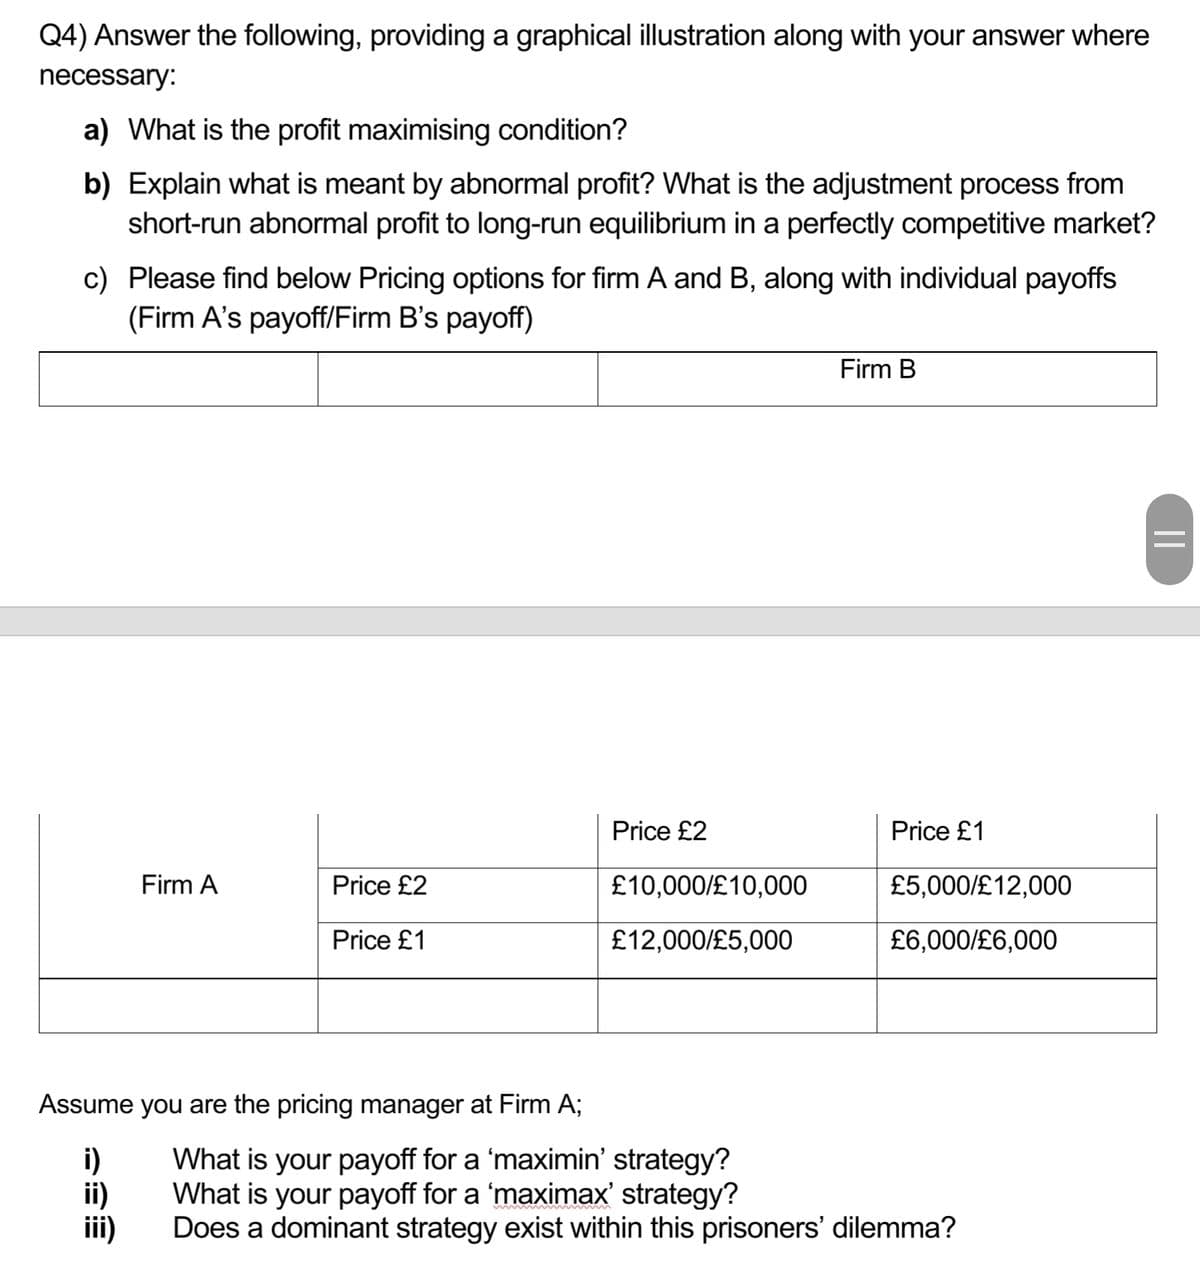 Q4) Answer the following, providing a graphical illustration along with your answer where
necessary:
a) What is the profit maximising condition?
b) Explain what is meant by abnormal profit? What is the adjustment process from
short-run abnormal profit to long-run equilibrium in a perfectly competitive market?
c) Please find below Pricing options for firm A and B, along with individual payoffs
(Firm A's payoff/Firm B's payoff)
Firm A
Price £2
Price £1
Assume you are the pricing manager at Firm A;
i)
ii)
Price £2
£10,000/£10,000
£12,000/£5,000
Firm B
Price £1
£5,000/£12,000
£6,000/£6,000
What is your payoff for a 'maximin' strategy?
What is your payoff for a 'maximax' strategy?
Does a dominant strategy exist within this prisoners' dilemma?